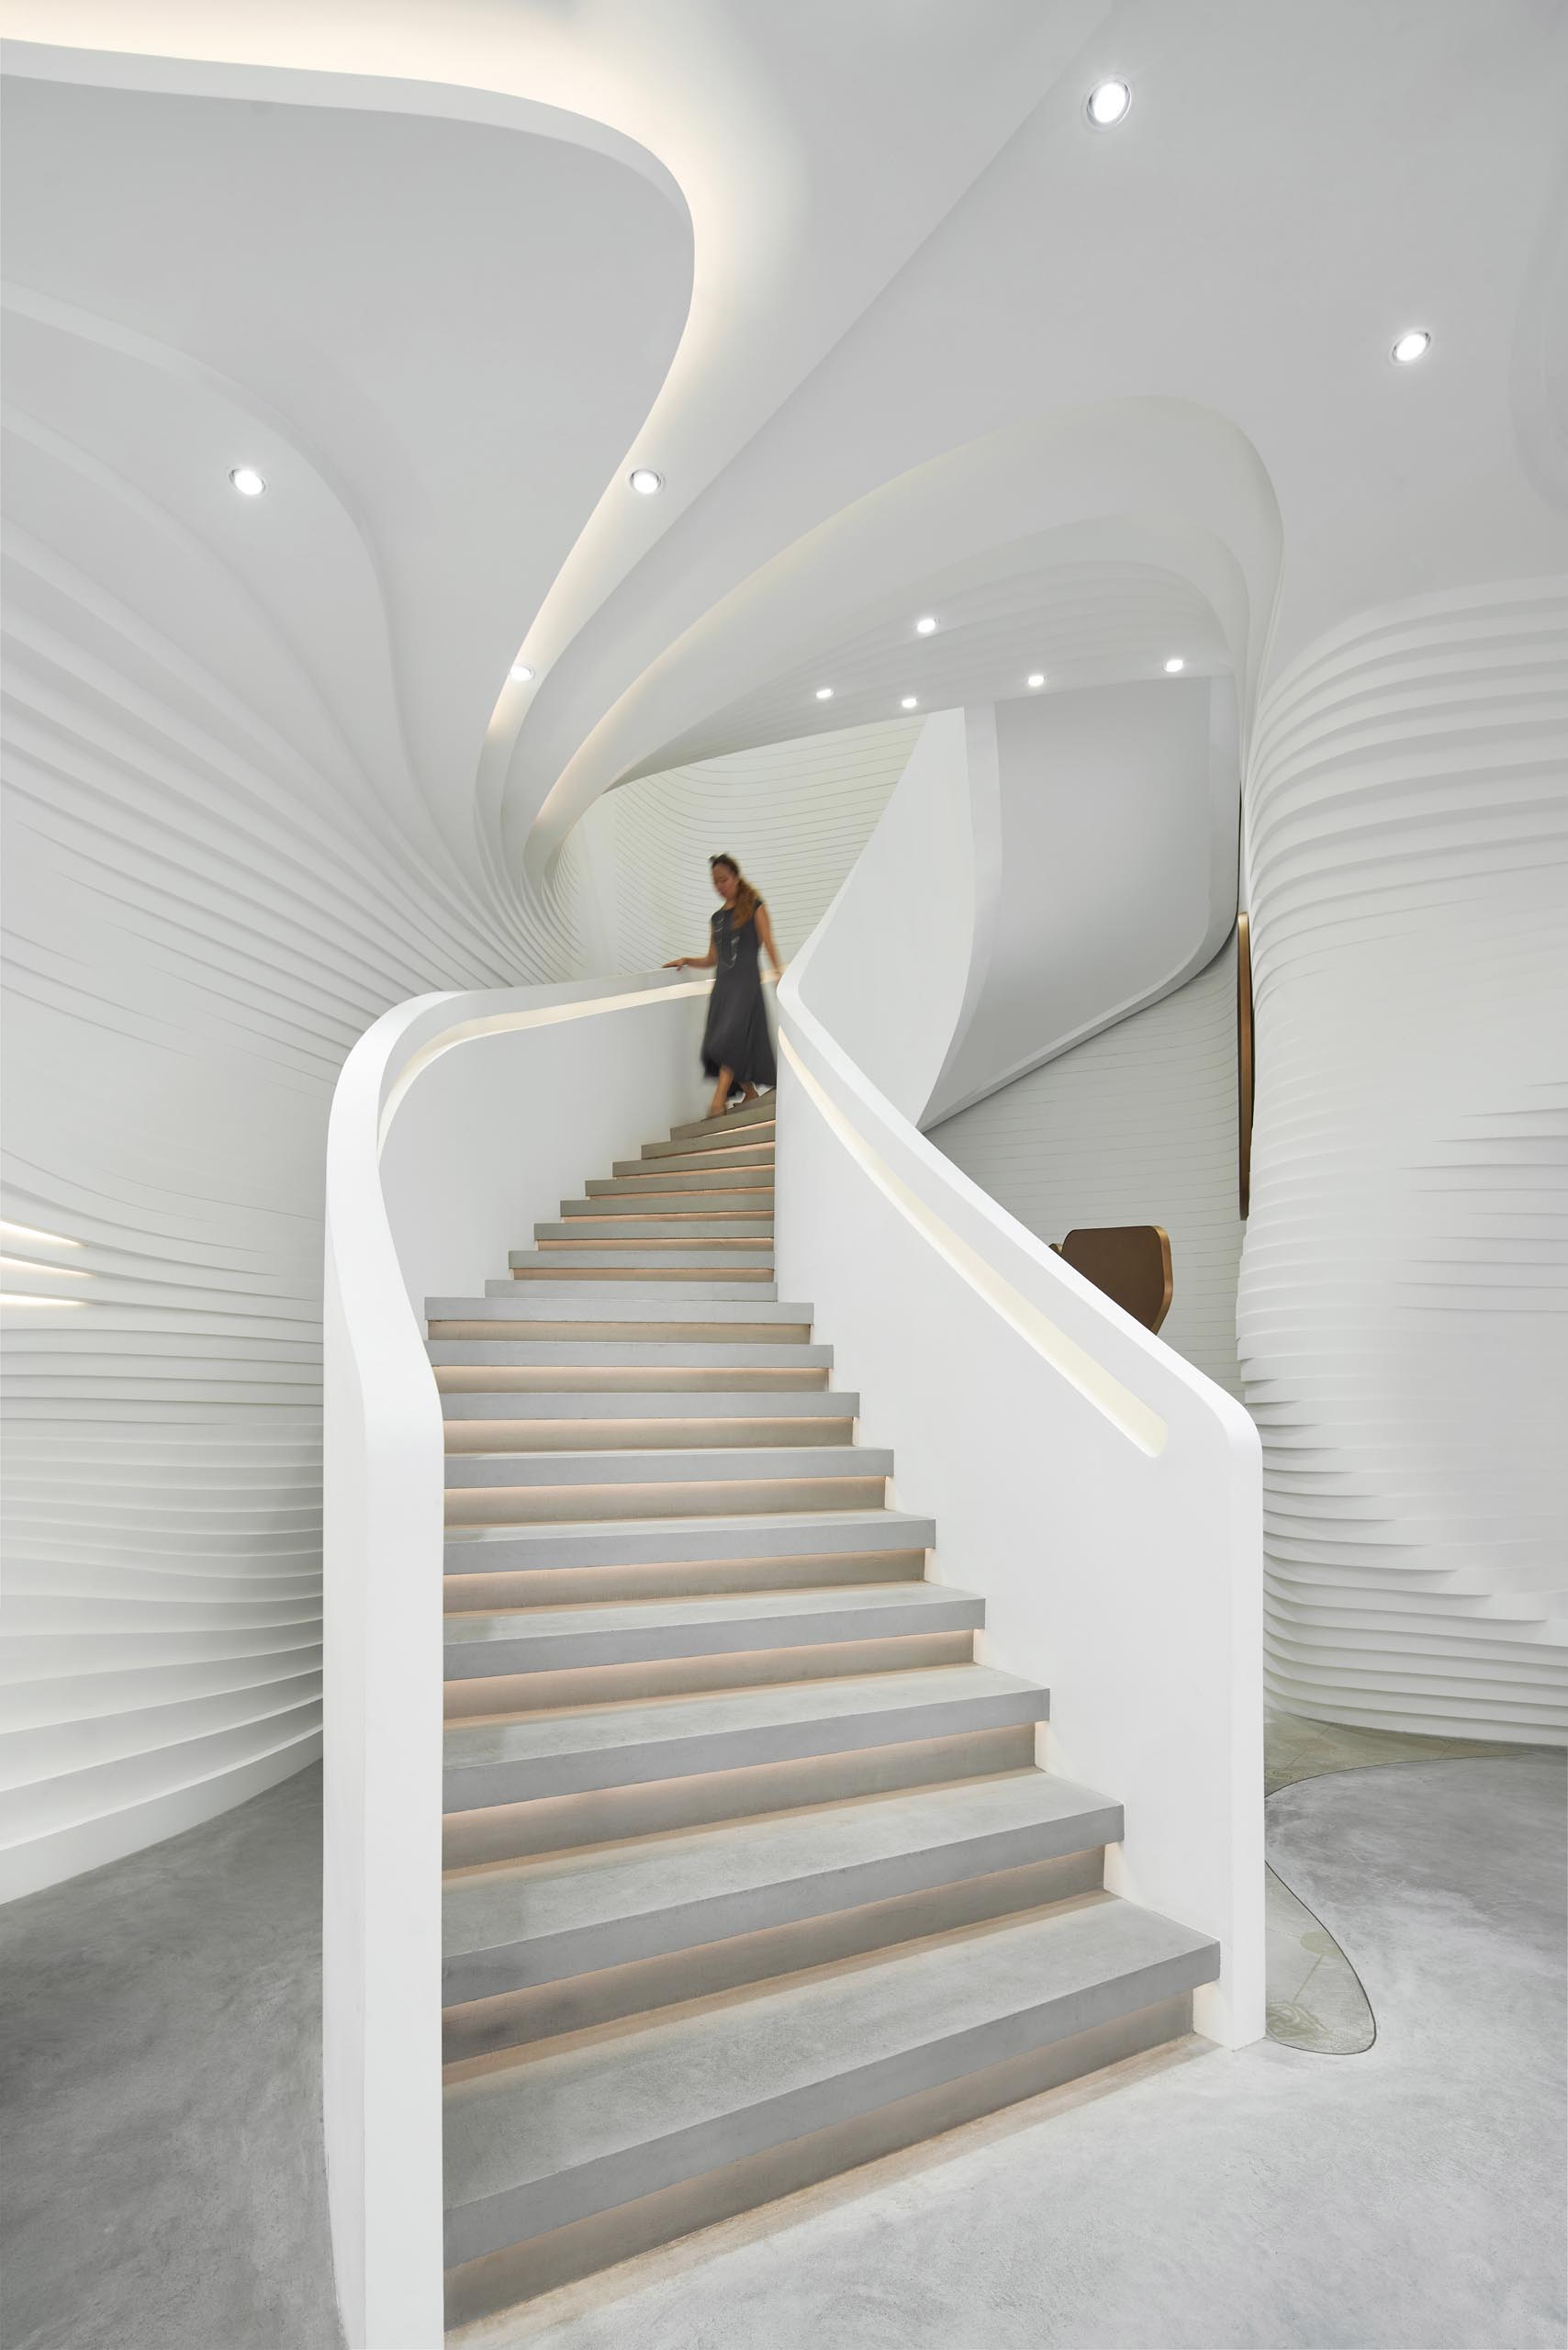 The lighting throughout the space are almost like gems, while the hidden lighting in the ceiling, the stair handrail, and underneath the stair treads, adds a soft glow to the space and highlights the design.